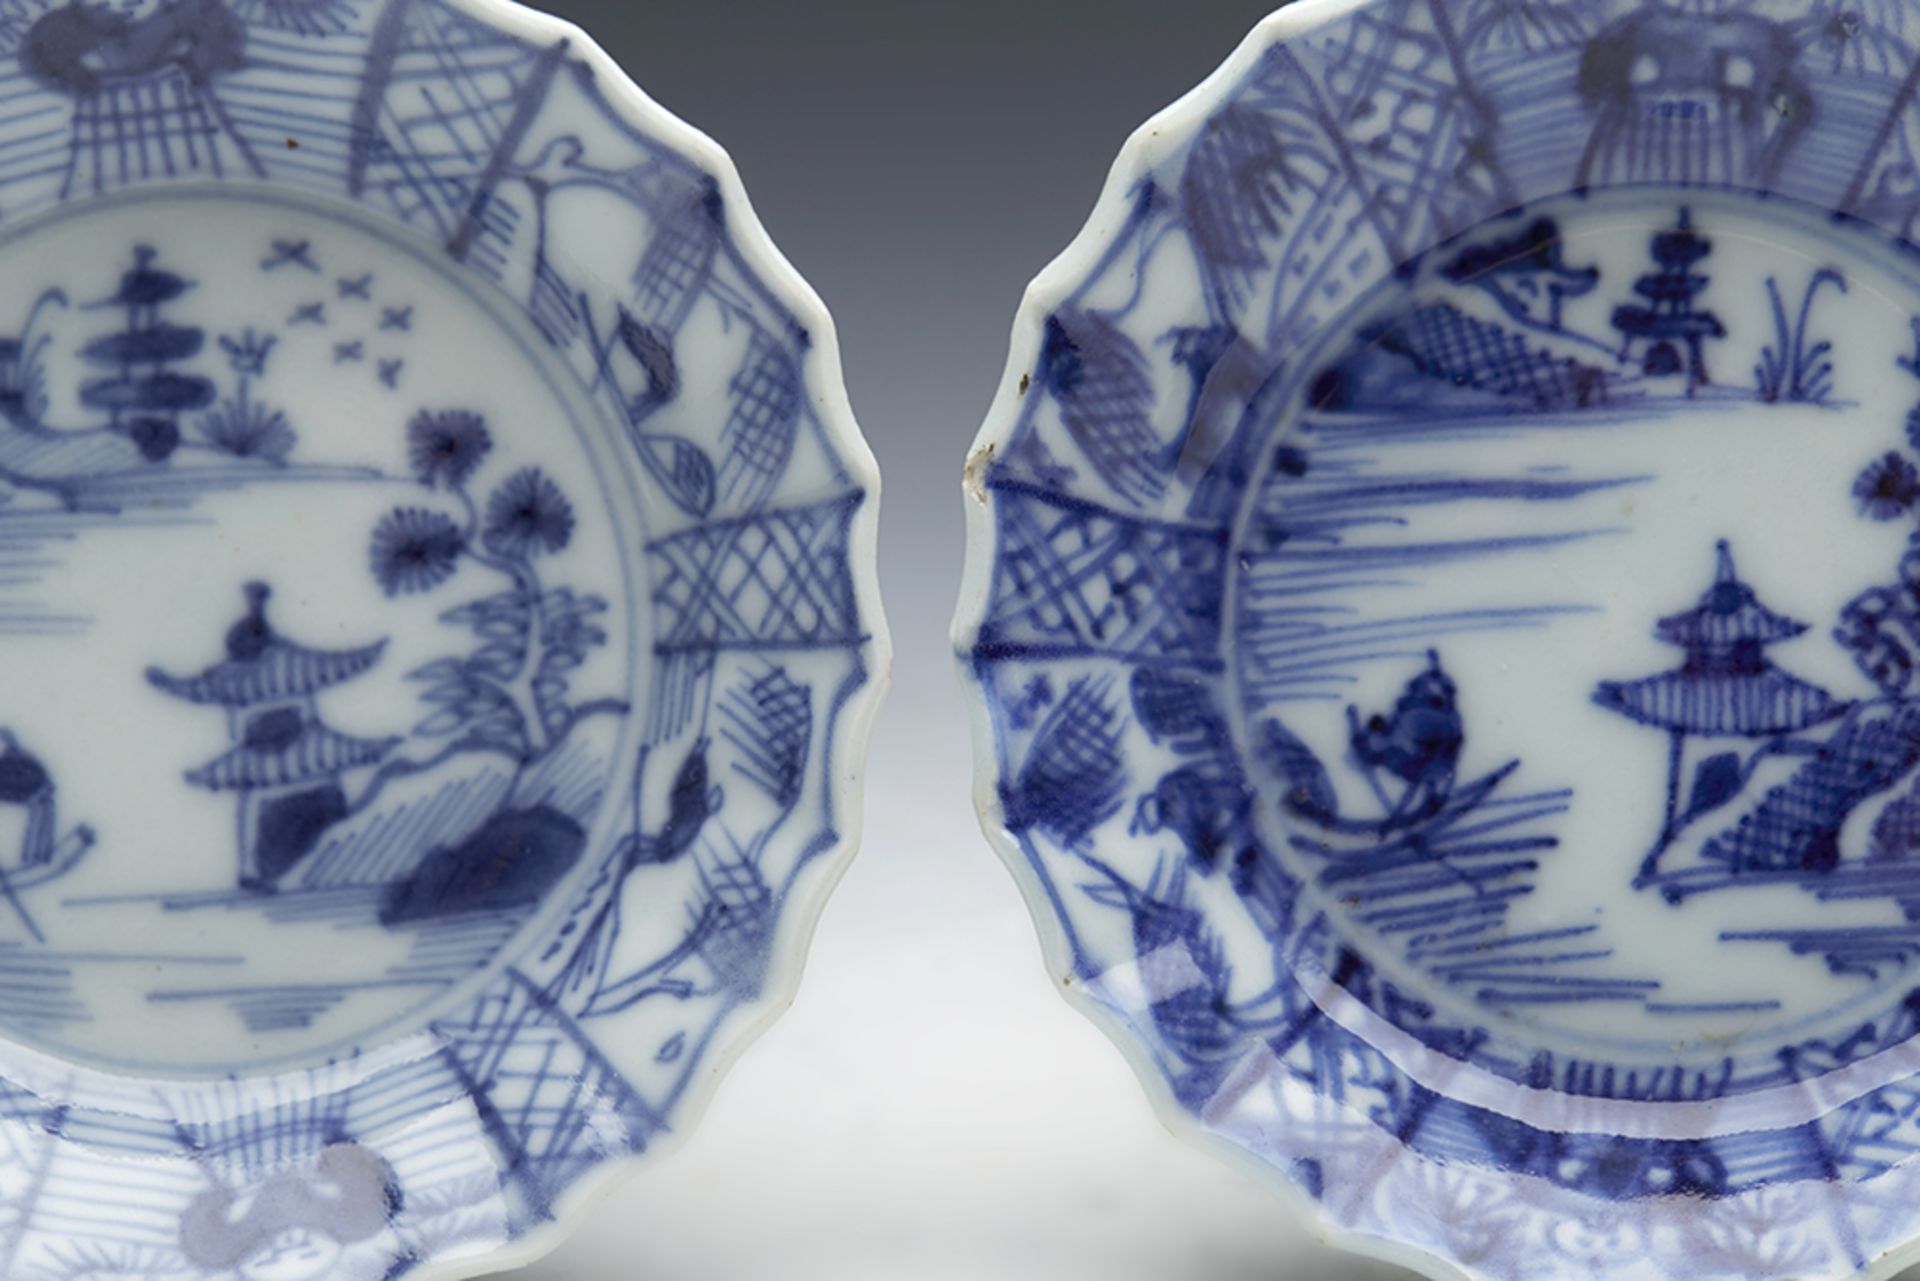 Pair Antique Chinese Qianlong Pickle Dishes With Watery Landscapes 18Th C. - Image 3 of 8